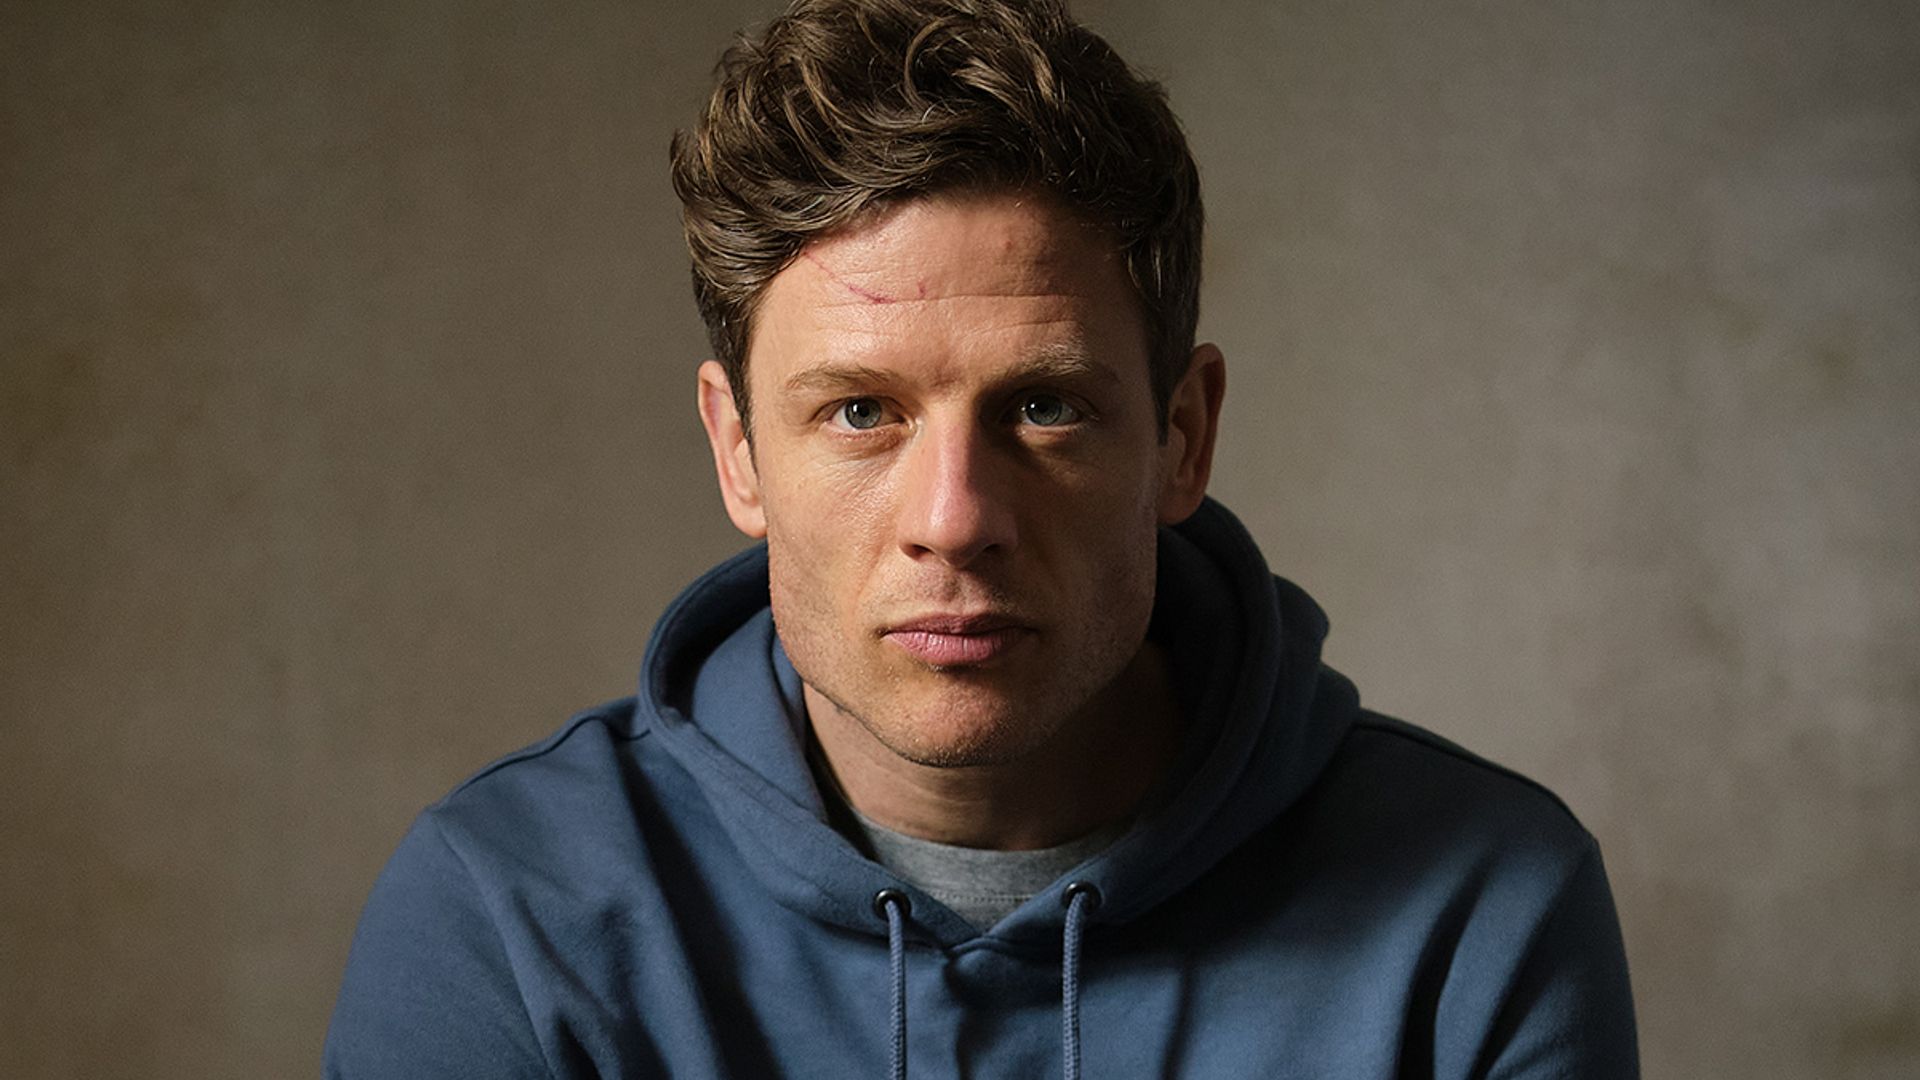 James Norton reveals bloodied photo ahead of Happy Valley finale